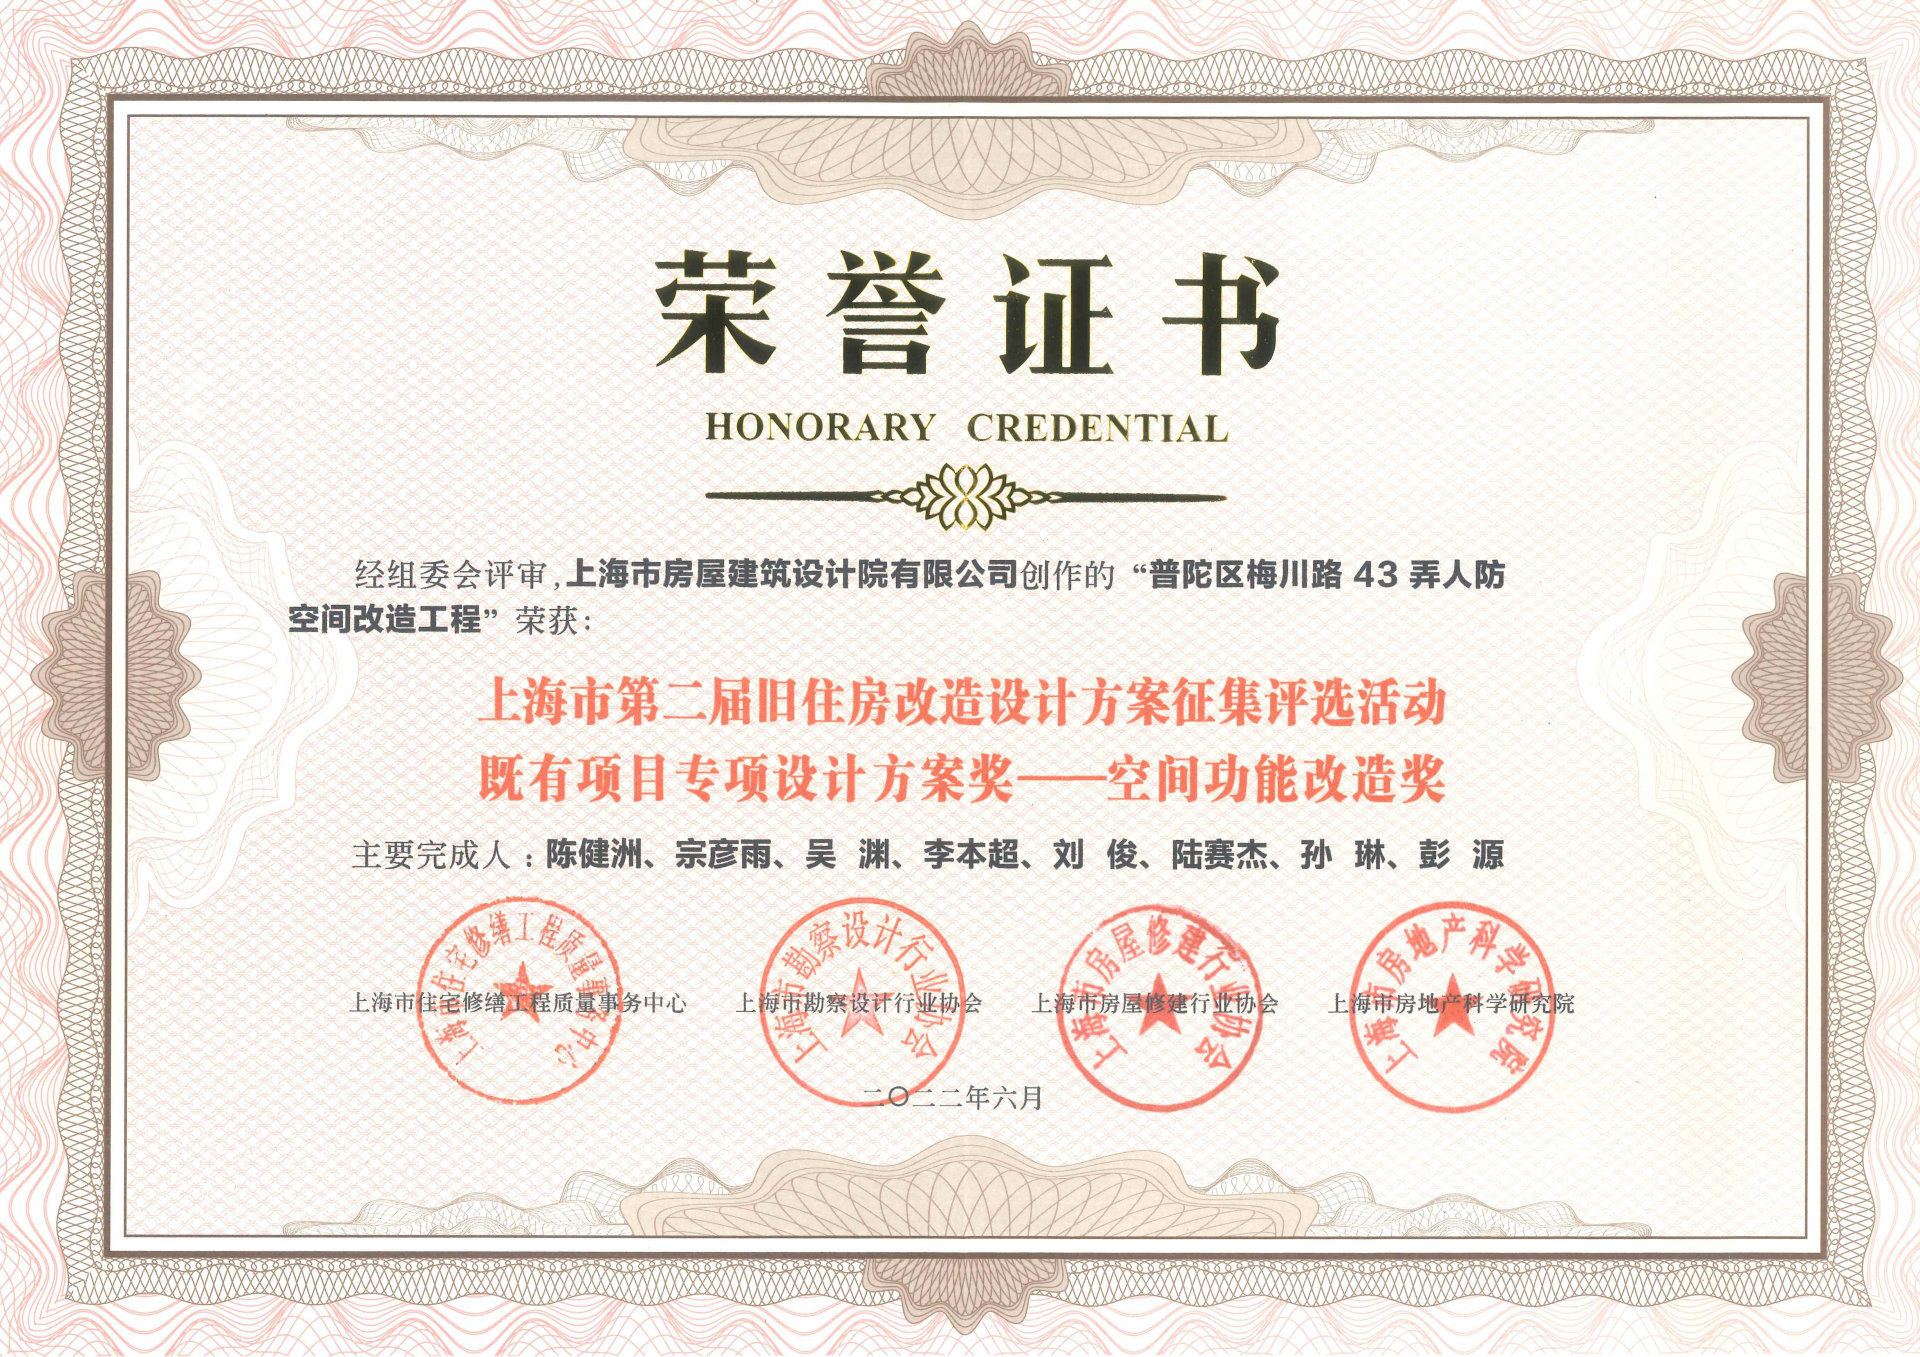 Three projects of Shangfang Academy won awards in the 